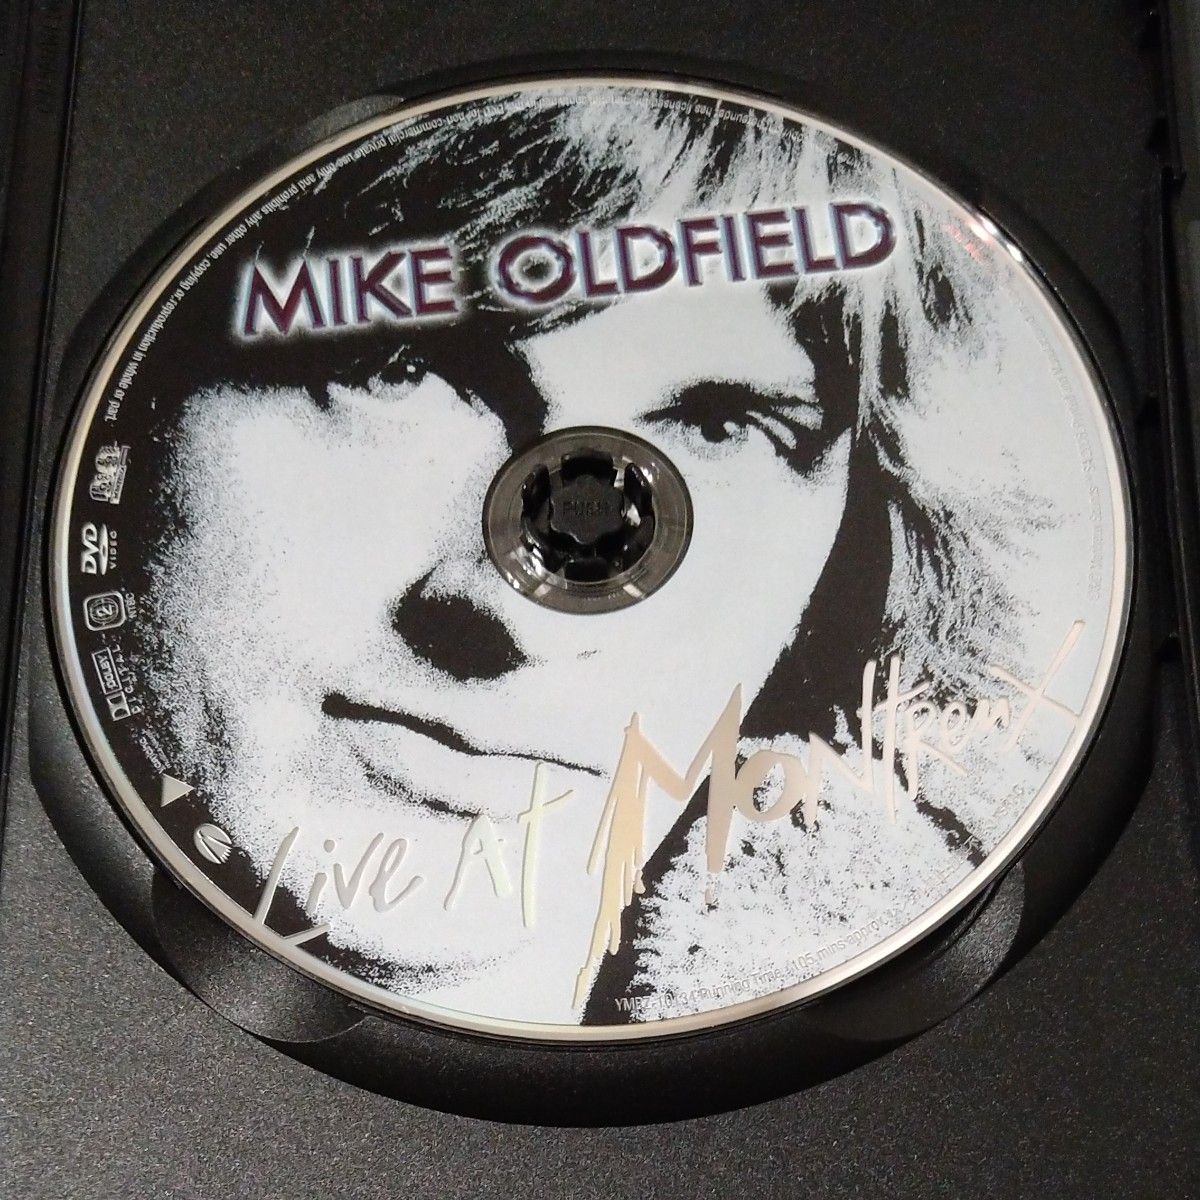 Mike Oldfield  LIVE AT MONTREUX 1981 ライブ アット モントルー 1981 国内盤 DVD